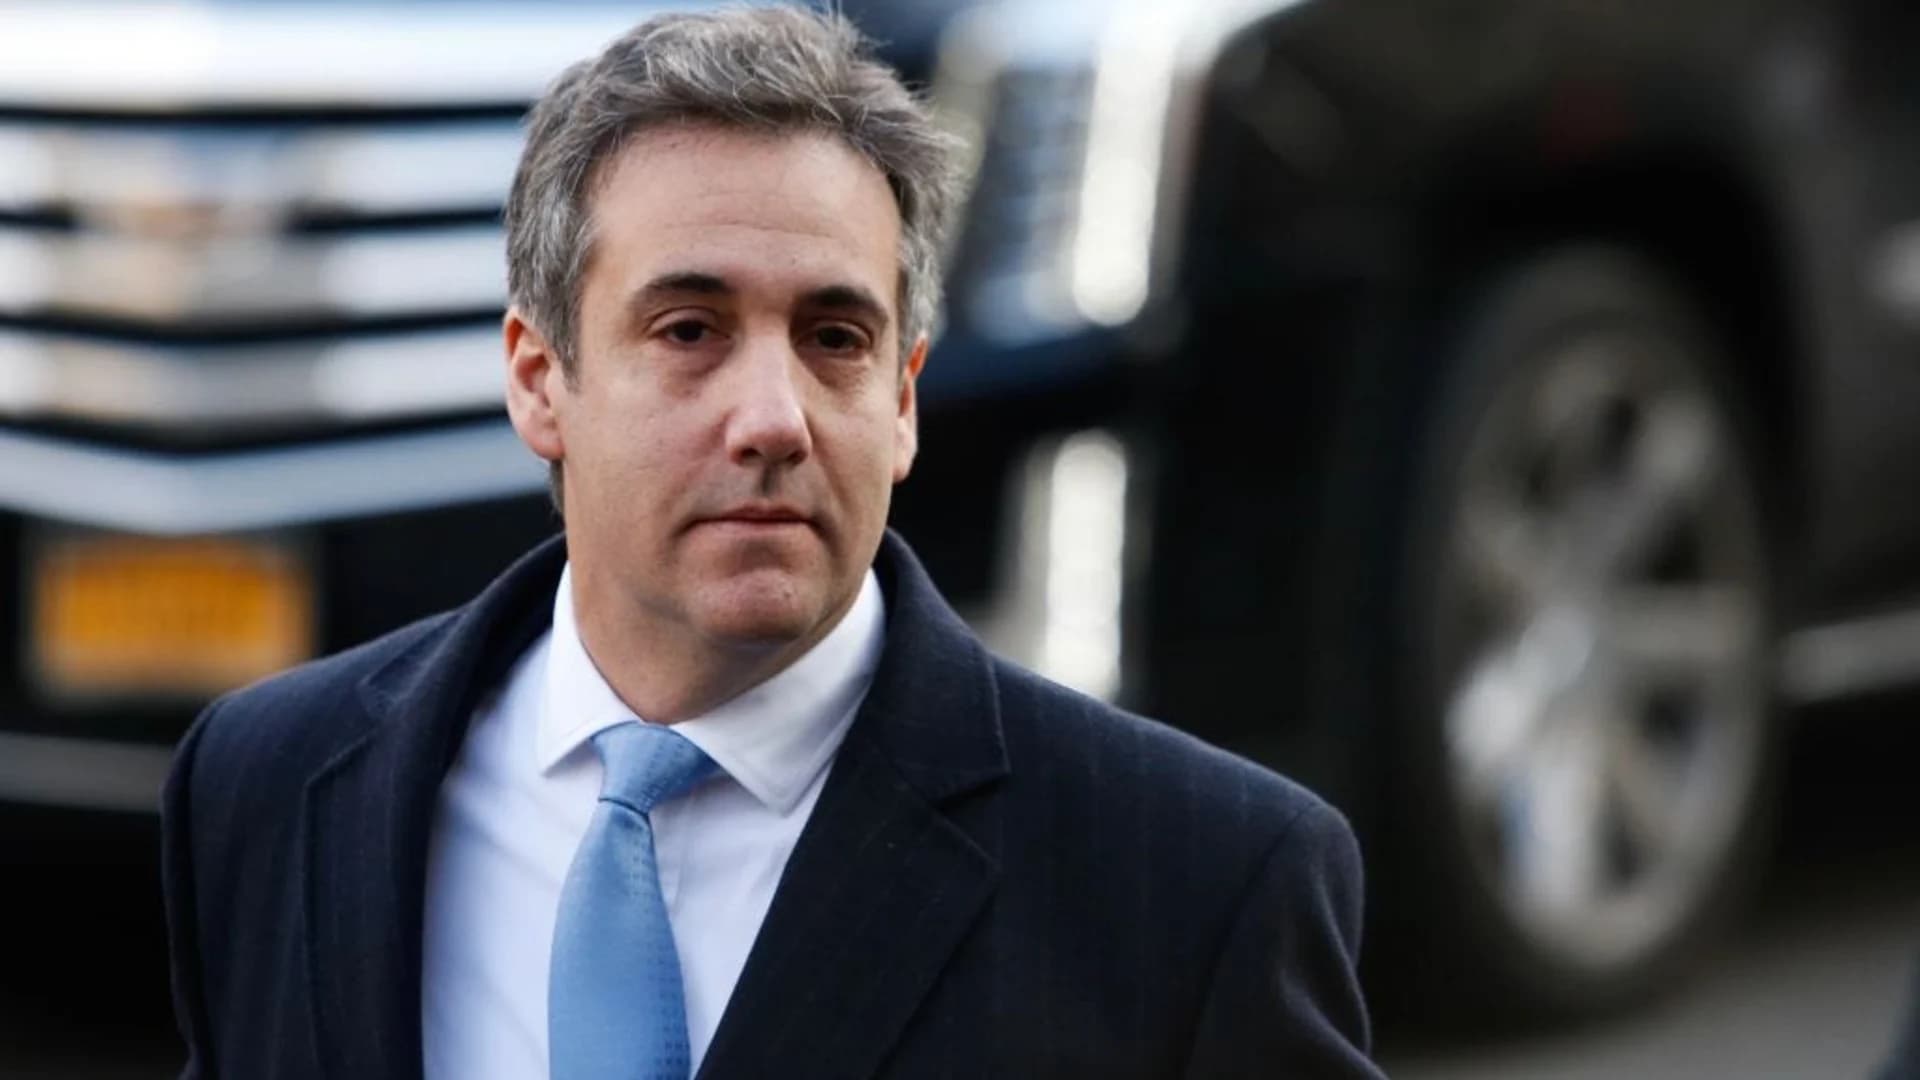 'Dirty deeds': Ex-Trump lawyer Cohen gets 3 years in prison